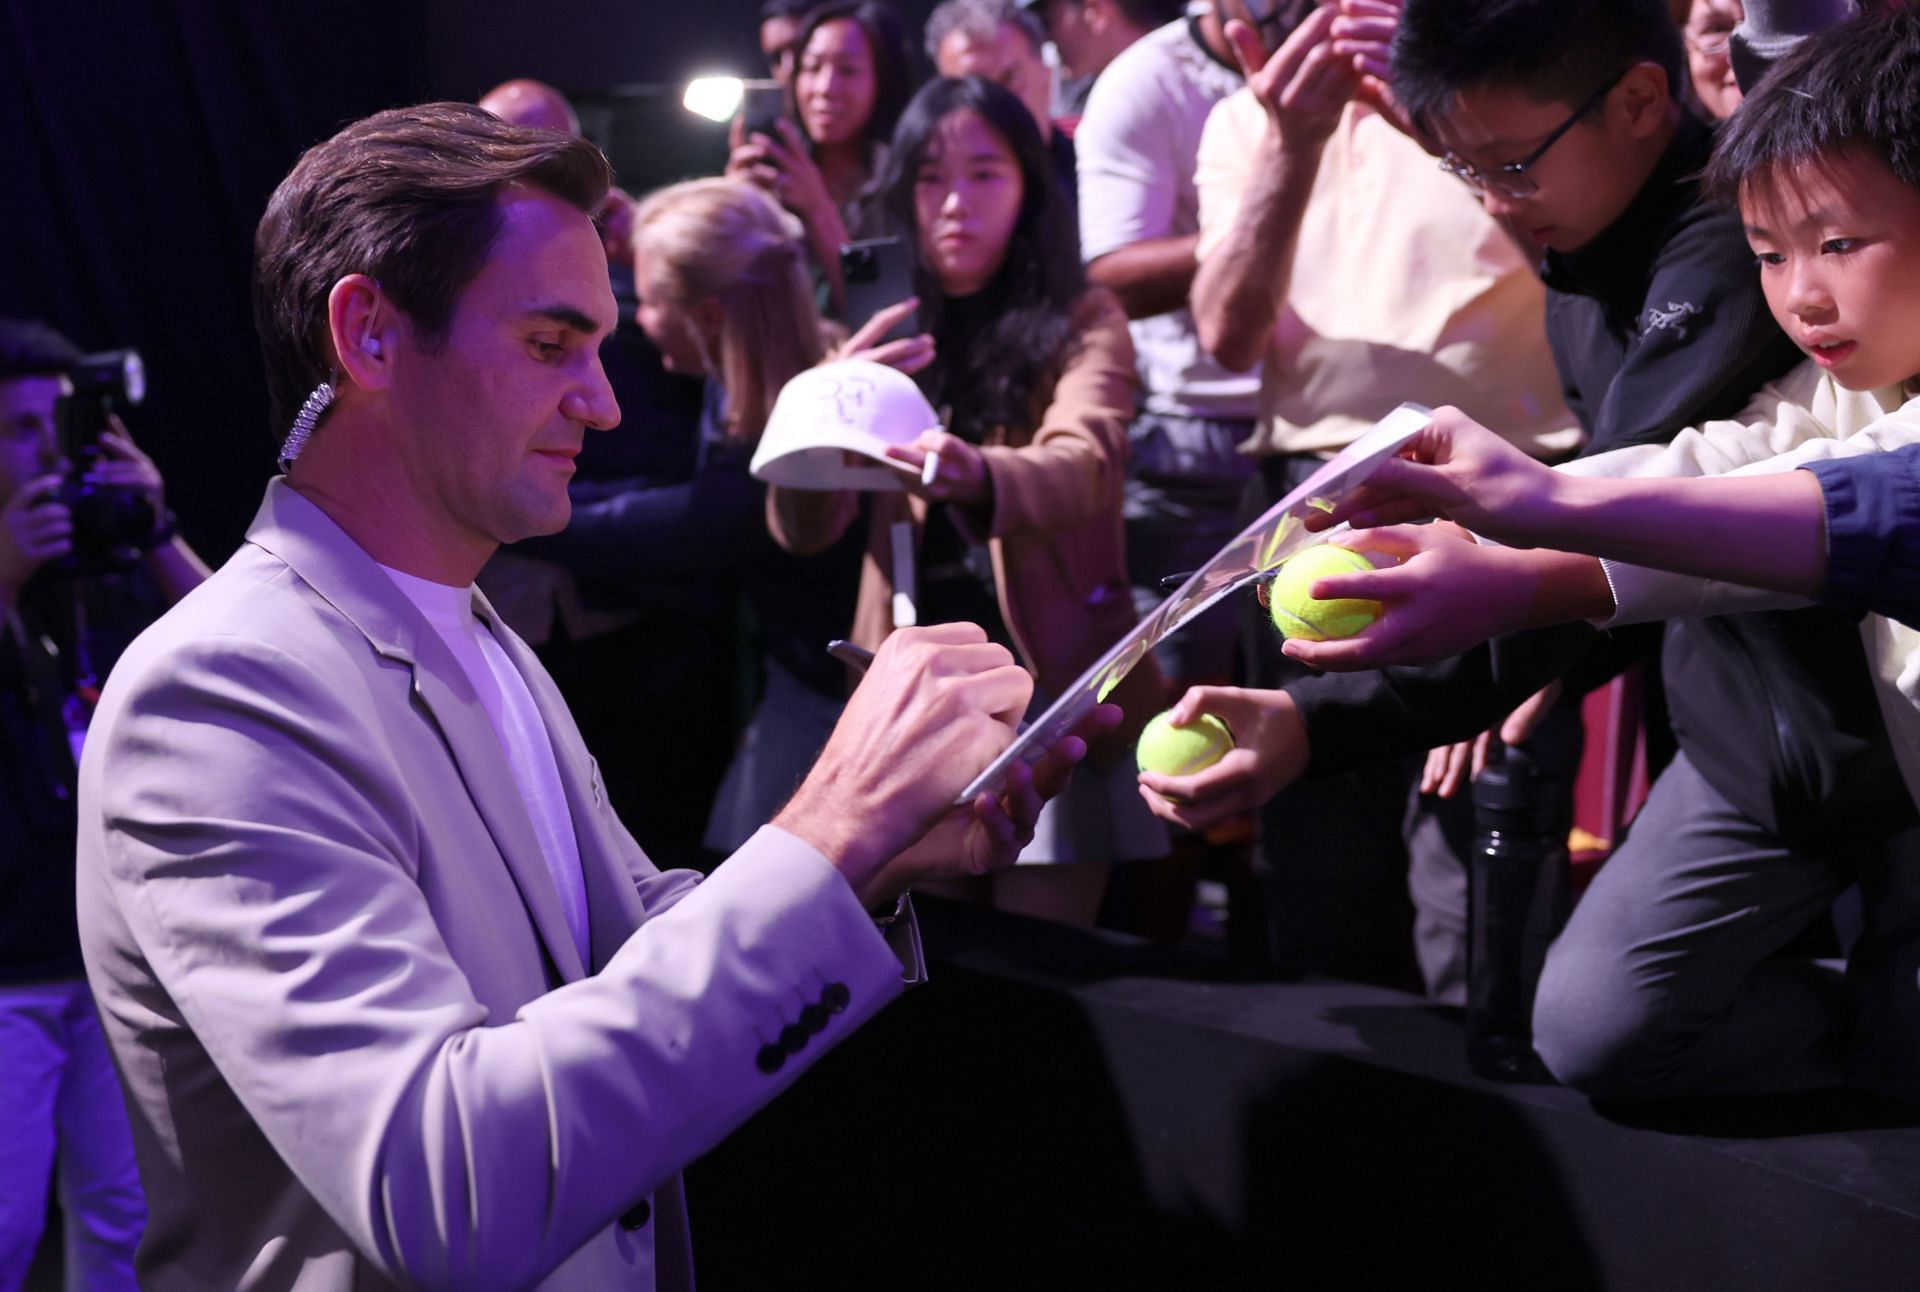 The Swiss legend signs autographs at Laver Cup 2023